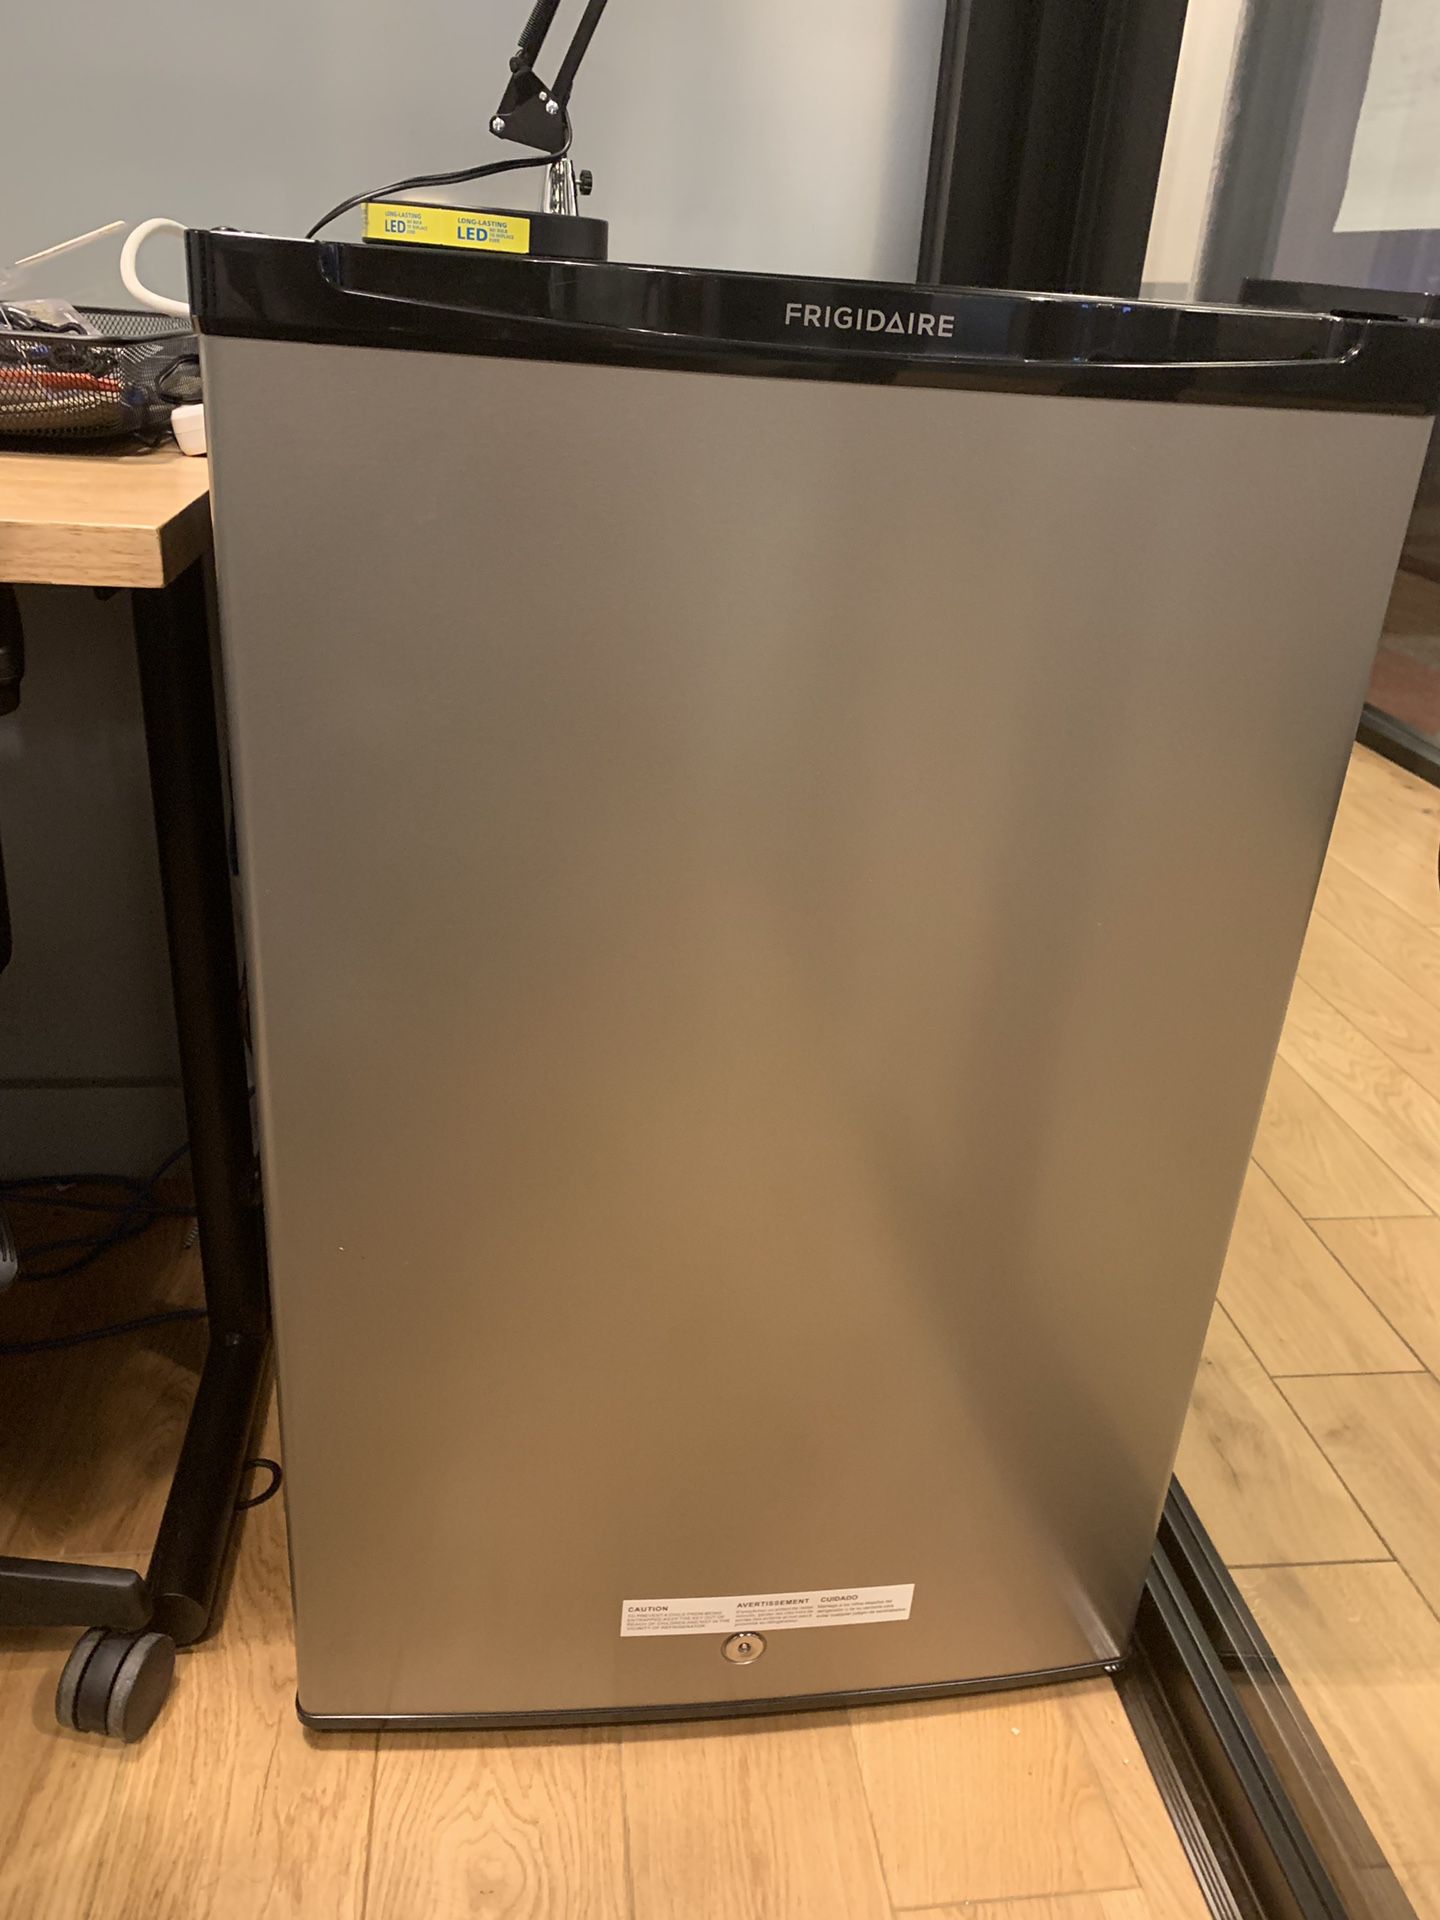 Frigidaire - 4.5 Cu. Ft. Mini Fridge - Lockable!!! (Comes with key and is in mint condition!)